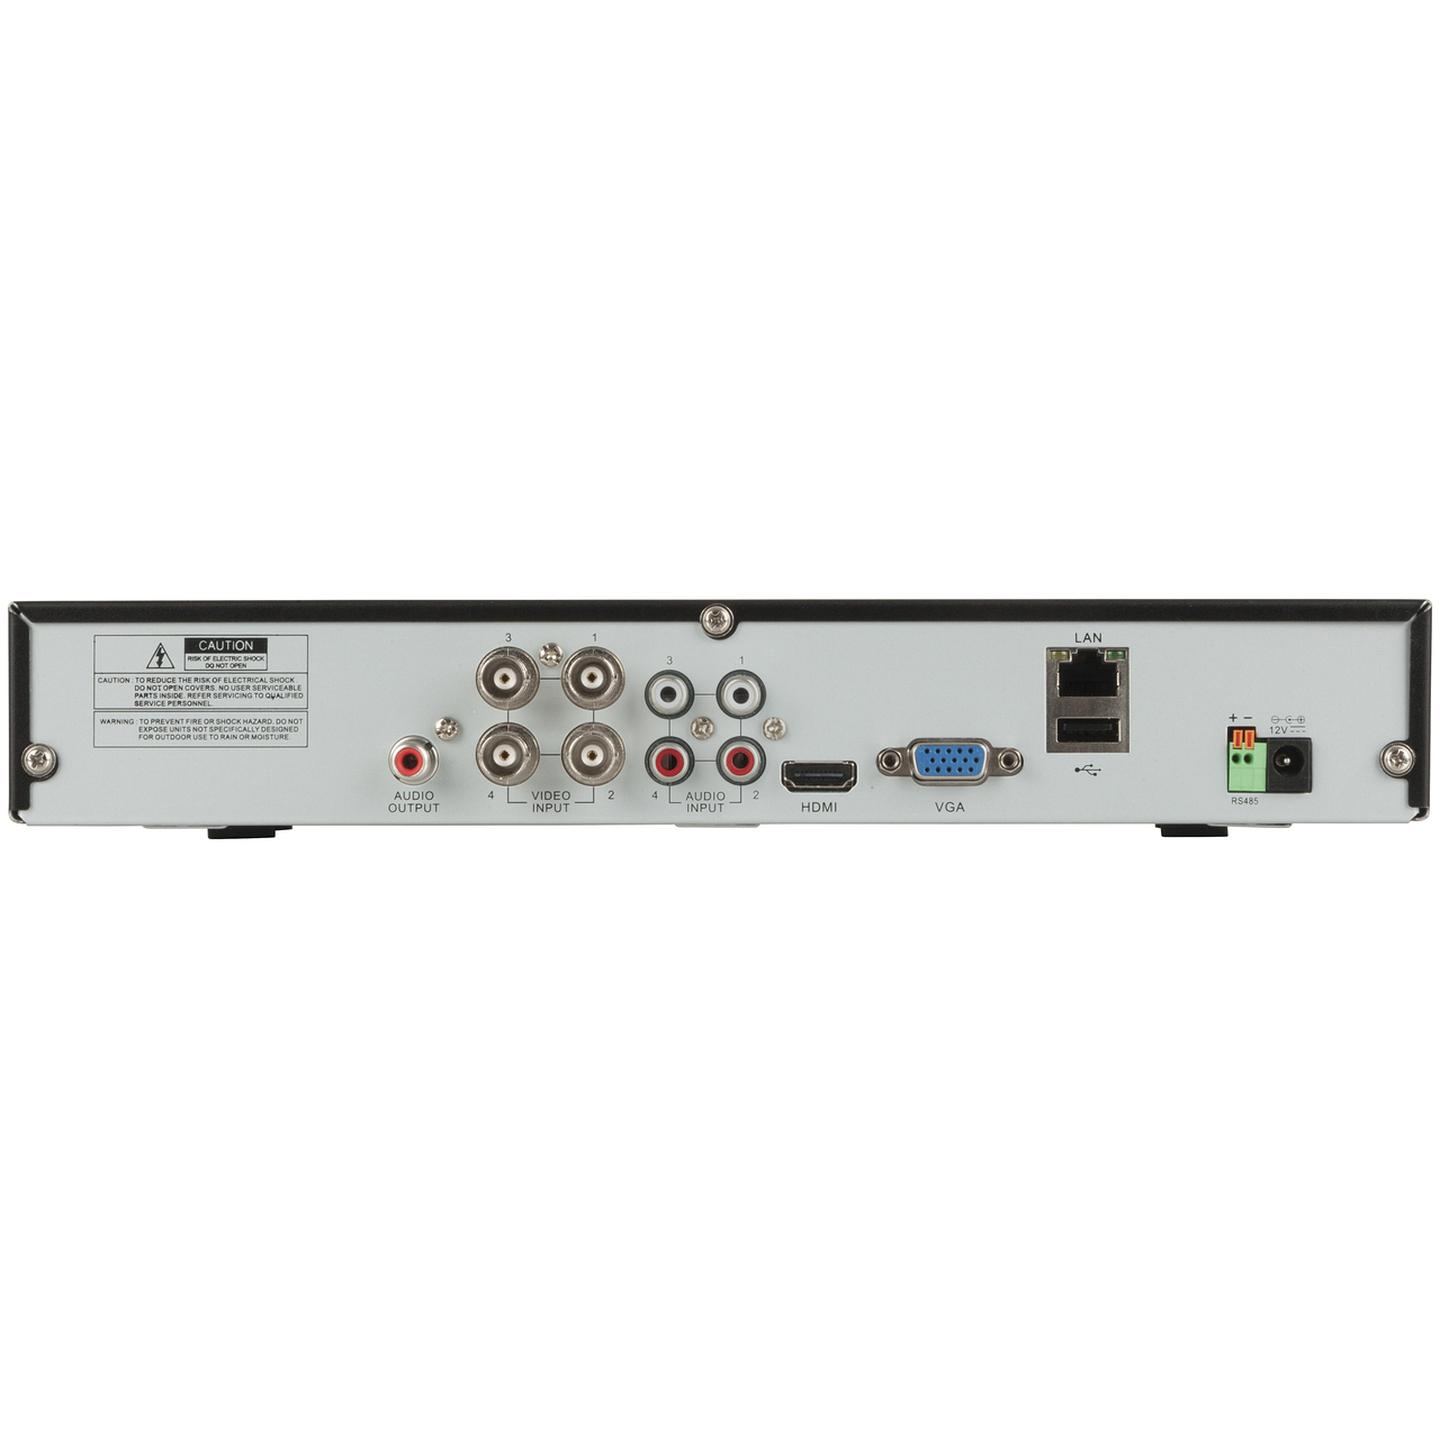 4 Channel 720p AHD DVR Kit with 4 x 720p Cameras